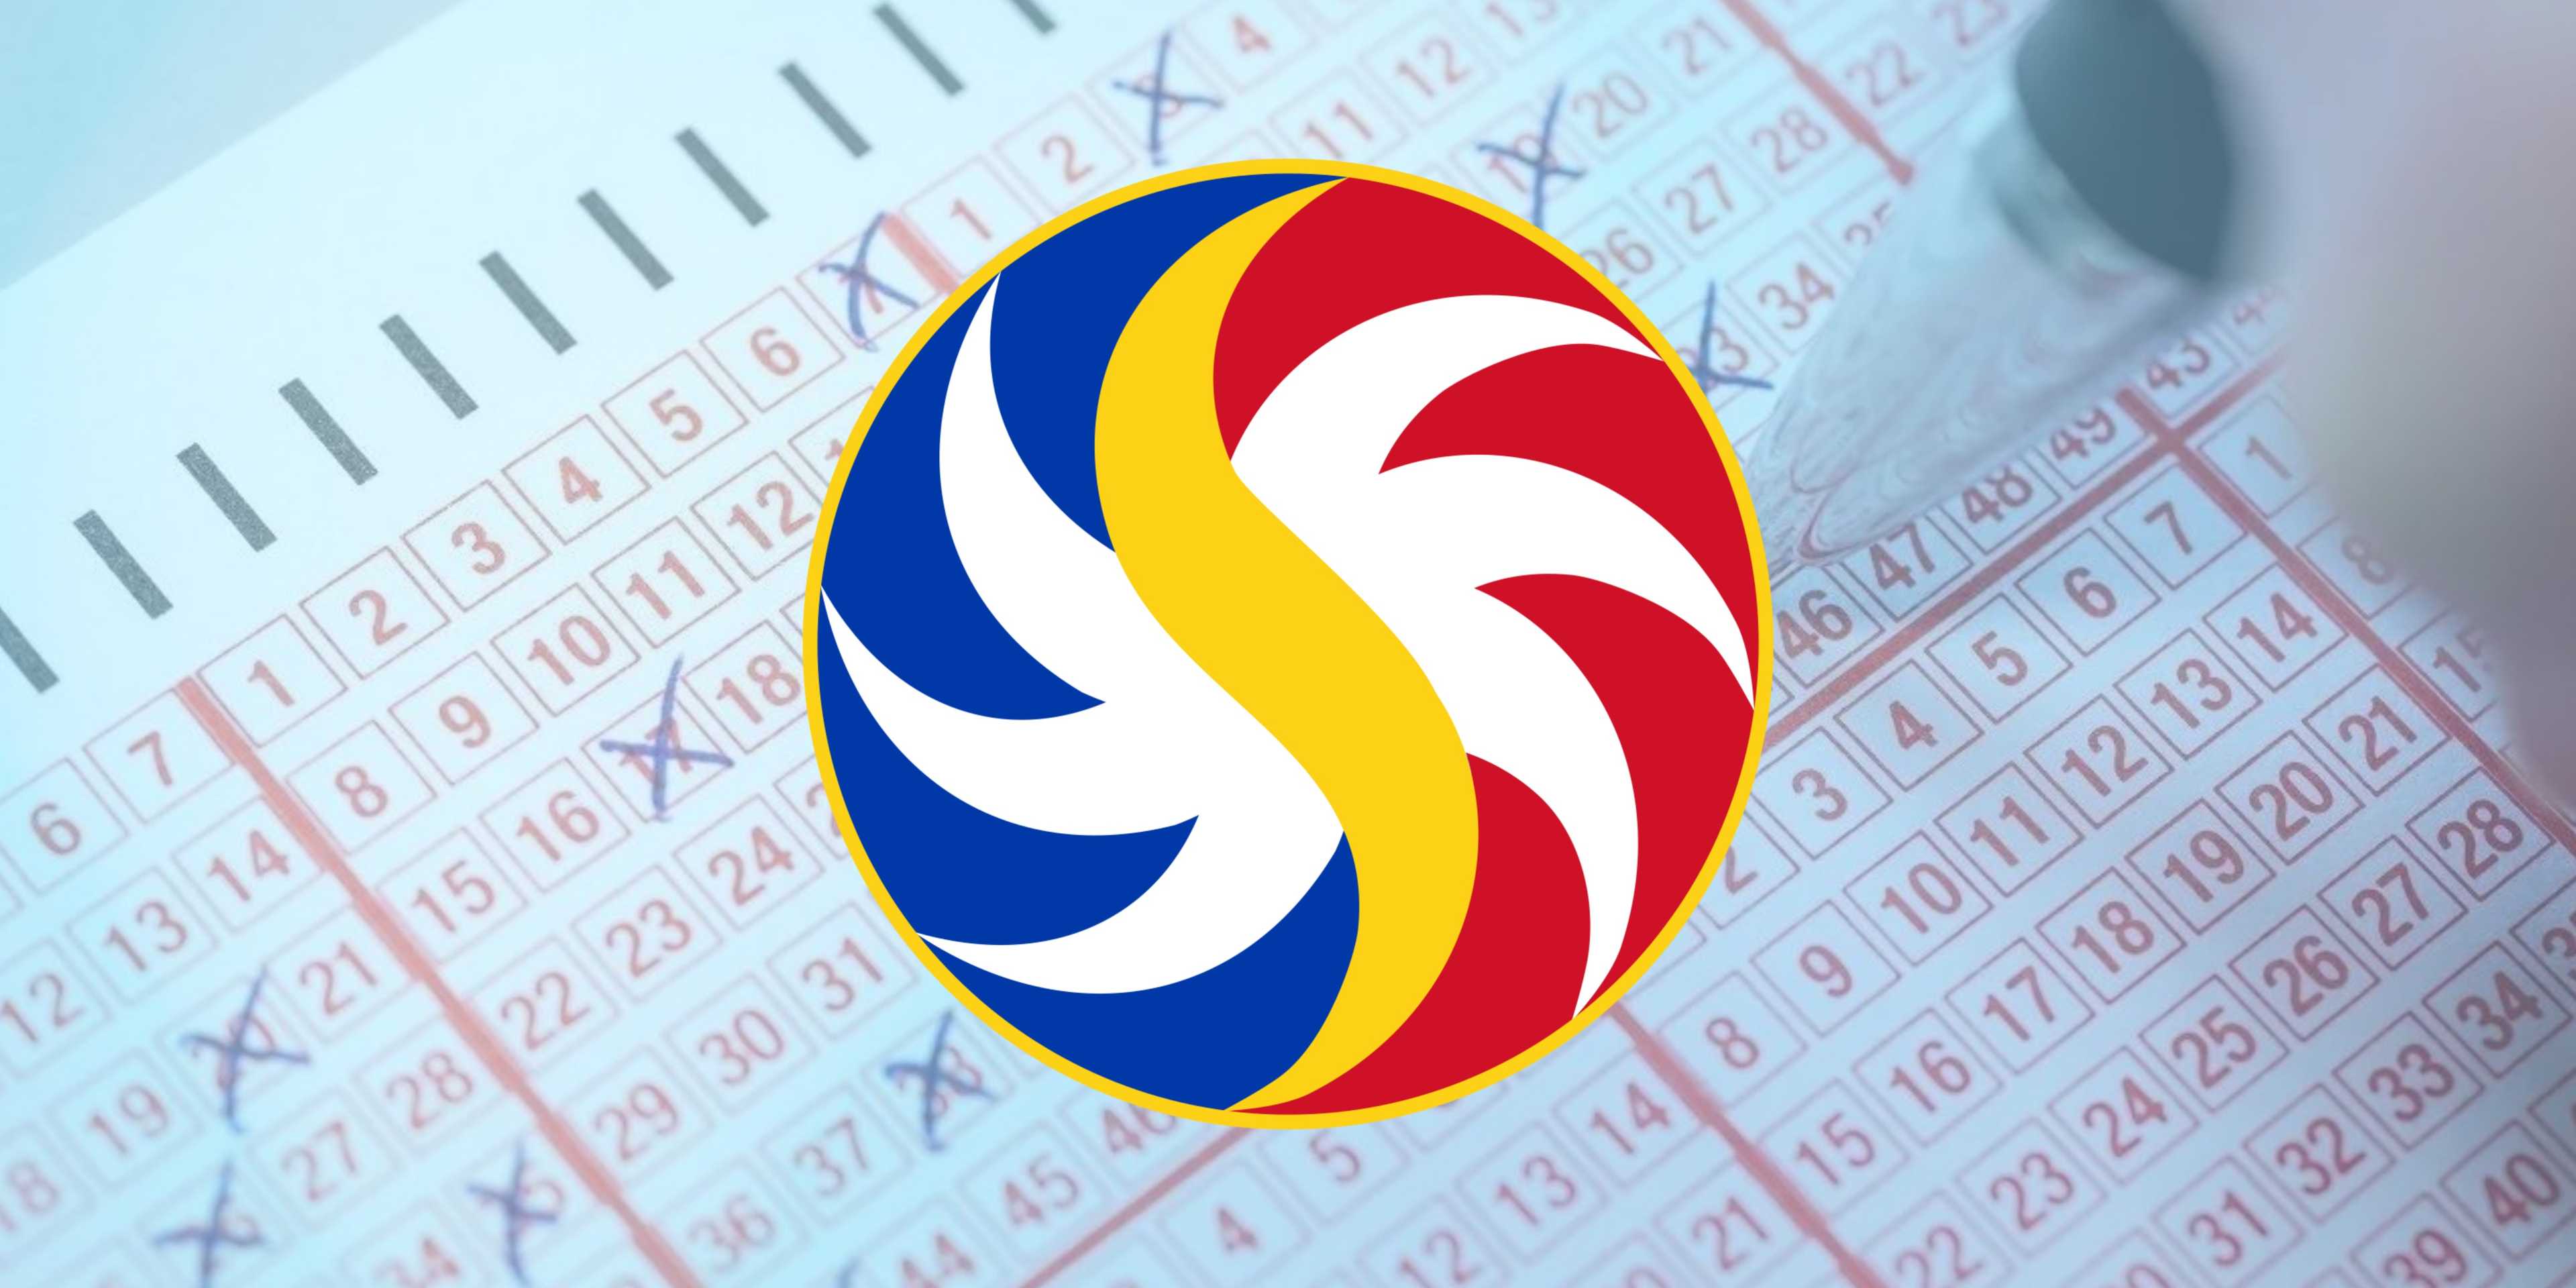 PCSO Lotto Draw Results on Sunday, January 28